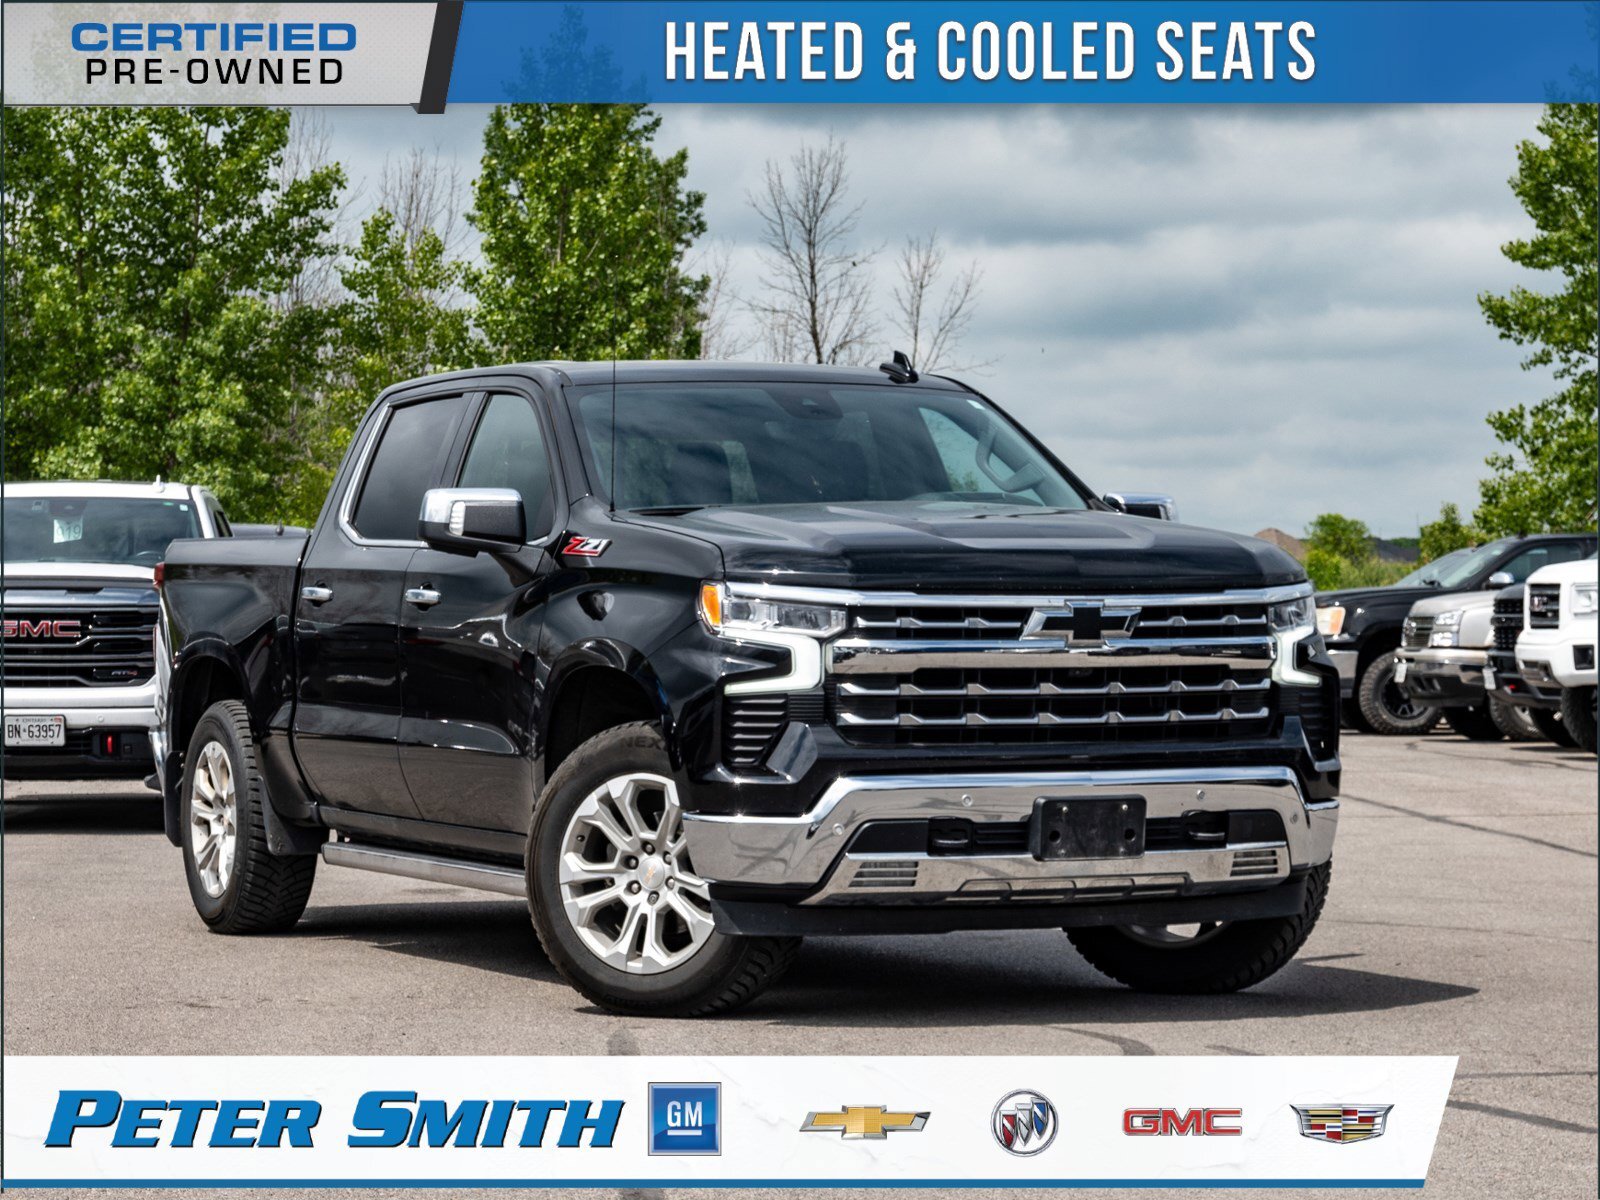 2022 Chevrolet Silverado 1500 LTZ - Sunroof | Heated & Cooled Front Seats